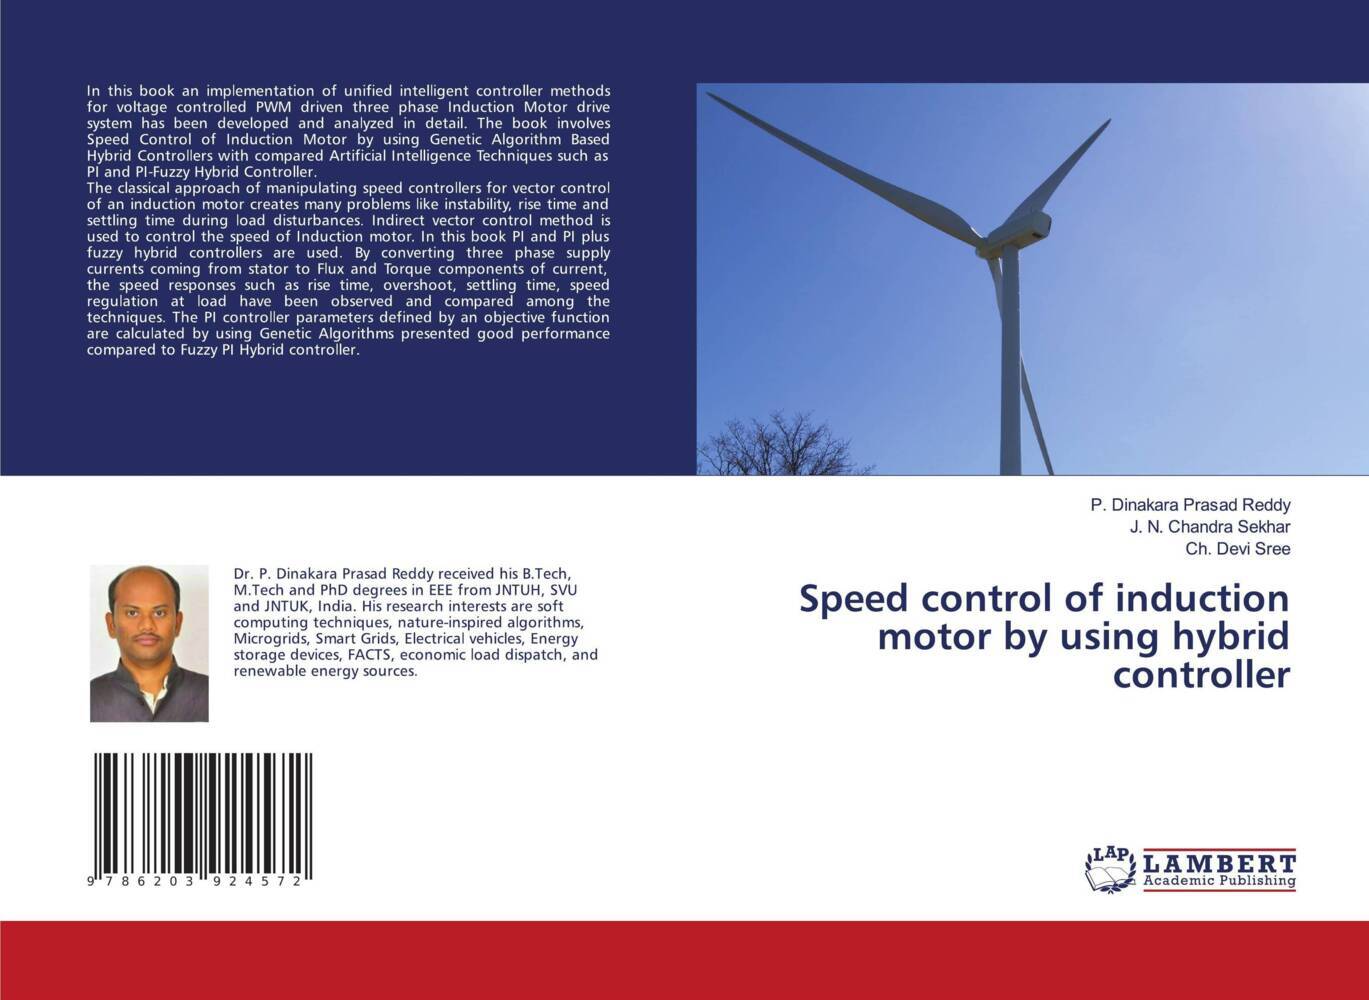 Speed control of induction motor by using hybrid controller